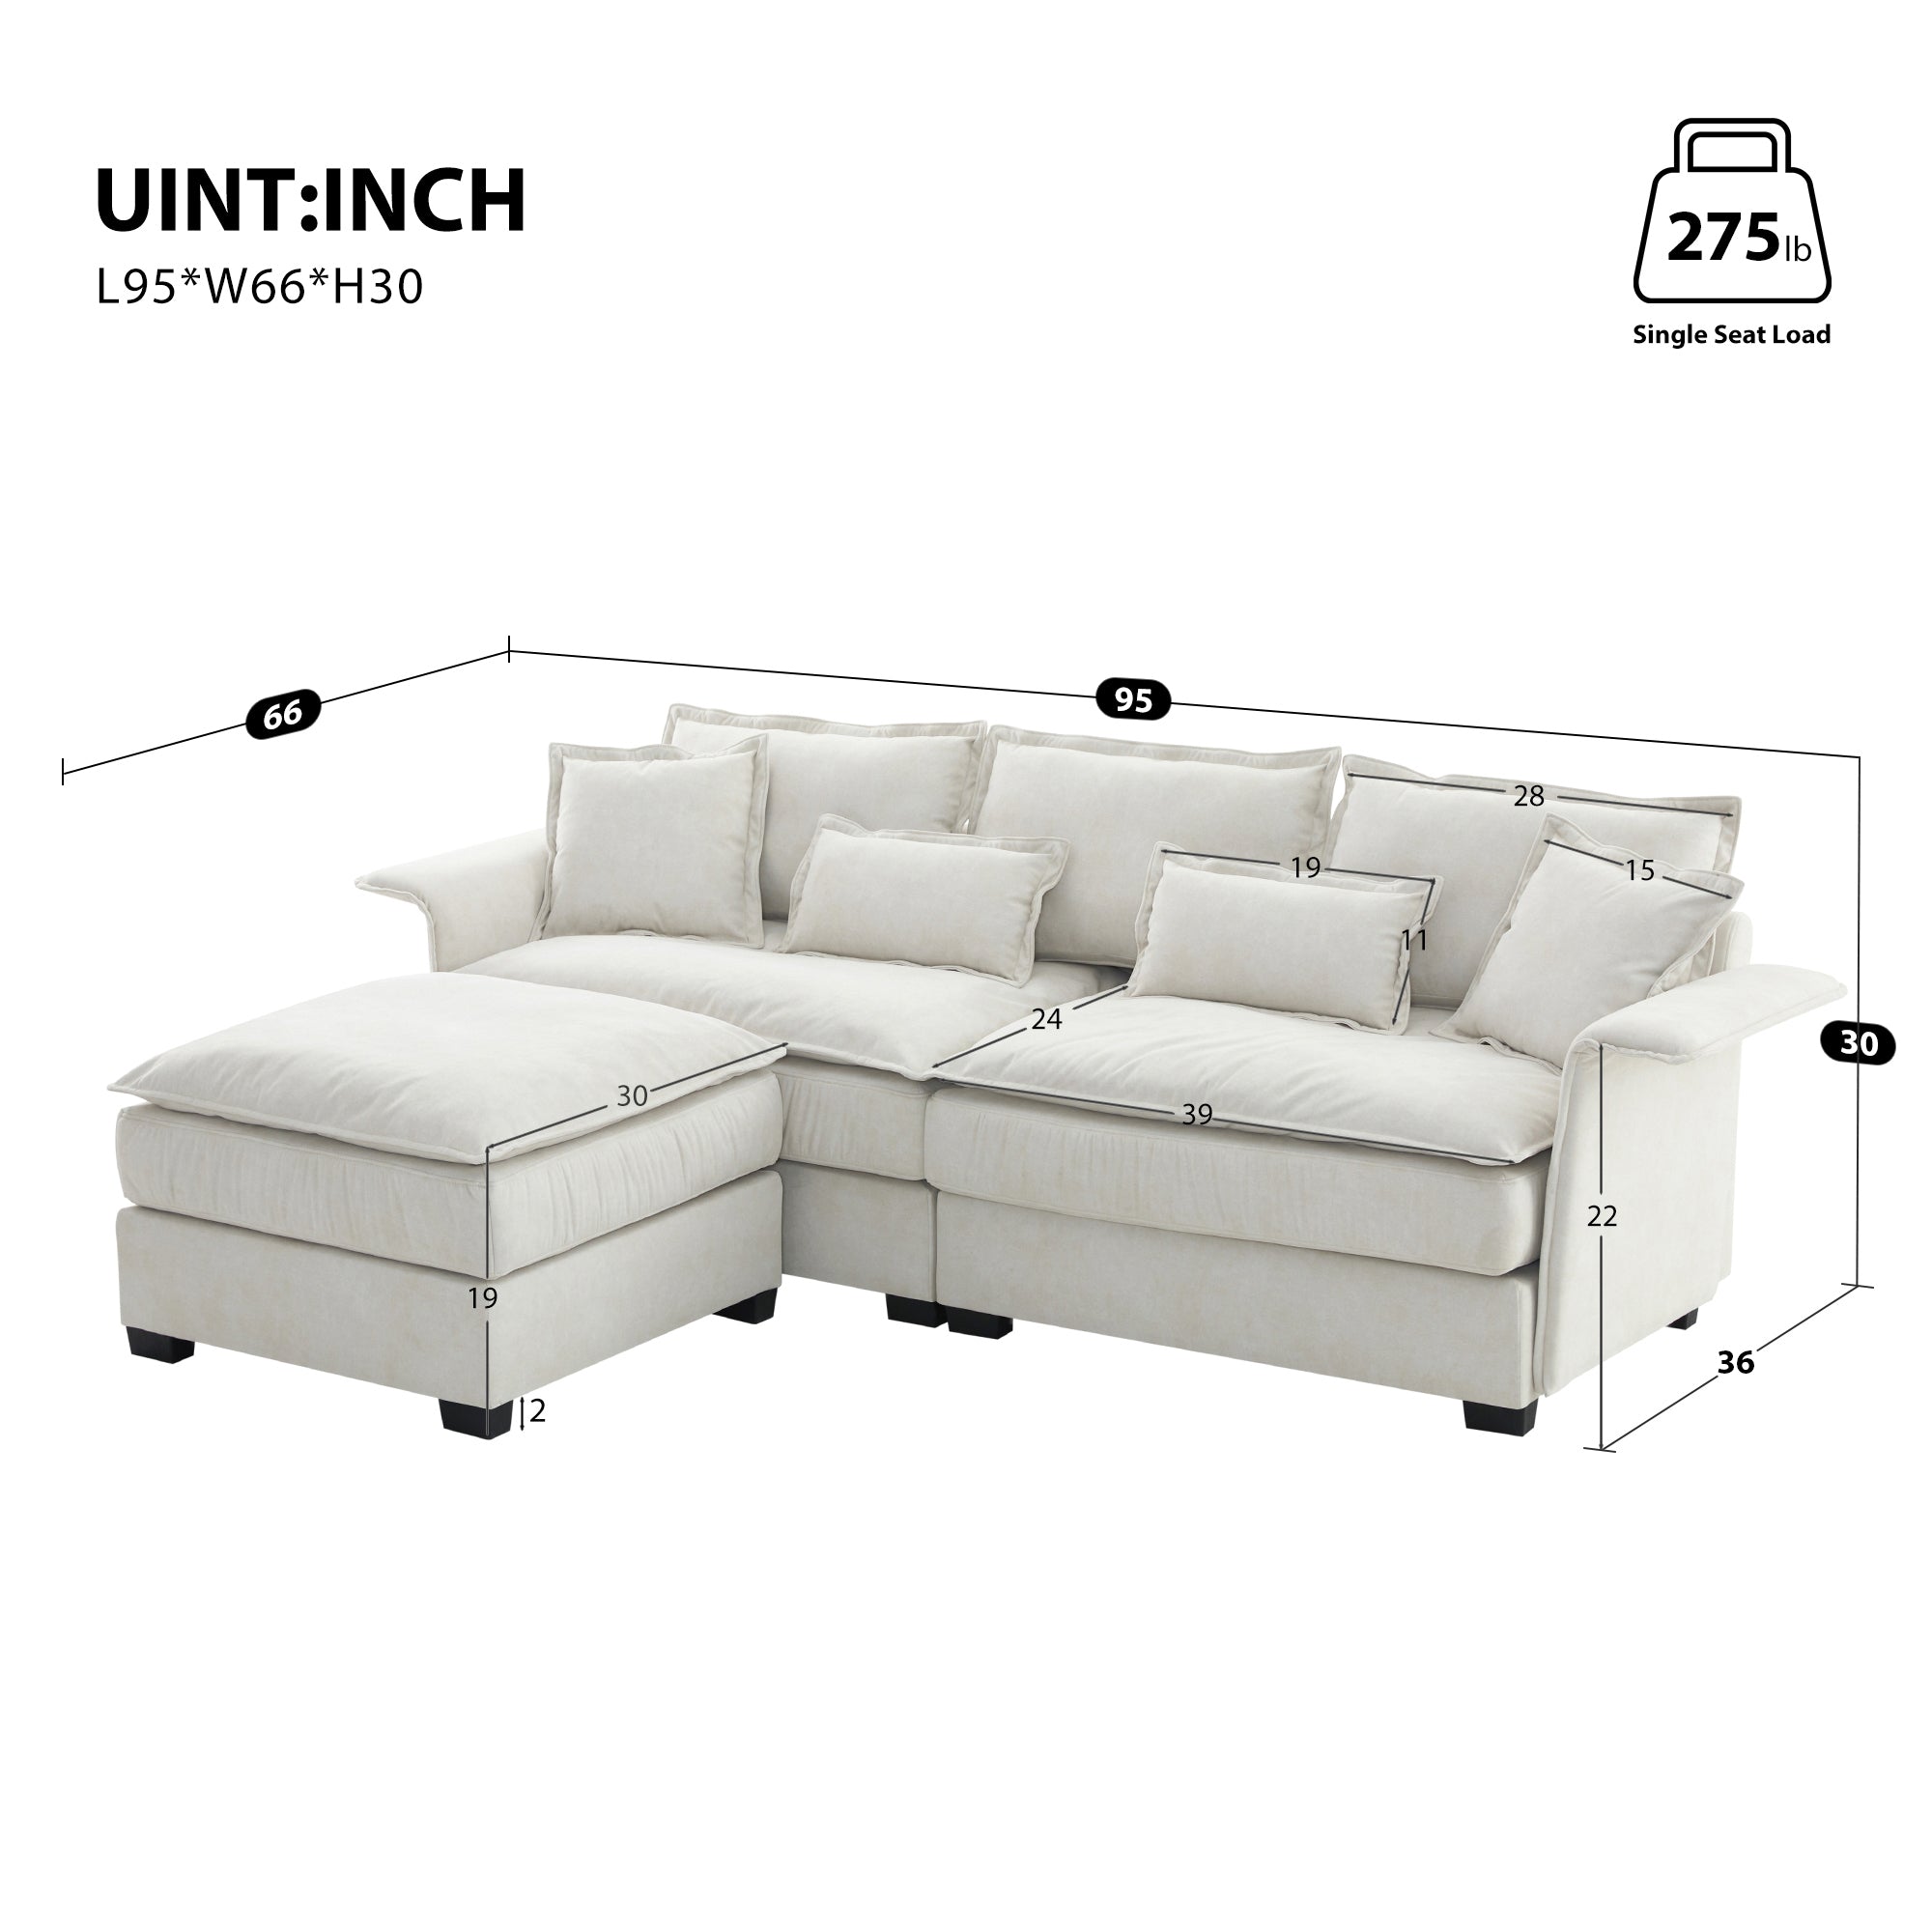 95" L-Shaped Sectional Sofa with Ottoman - Oversized 4-Seat Couch w/ Bentwood Arms - Beige-Stationary Sectionals-American Furniture Outlet